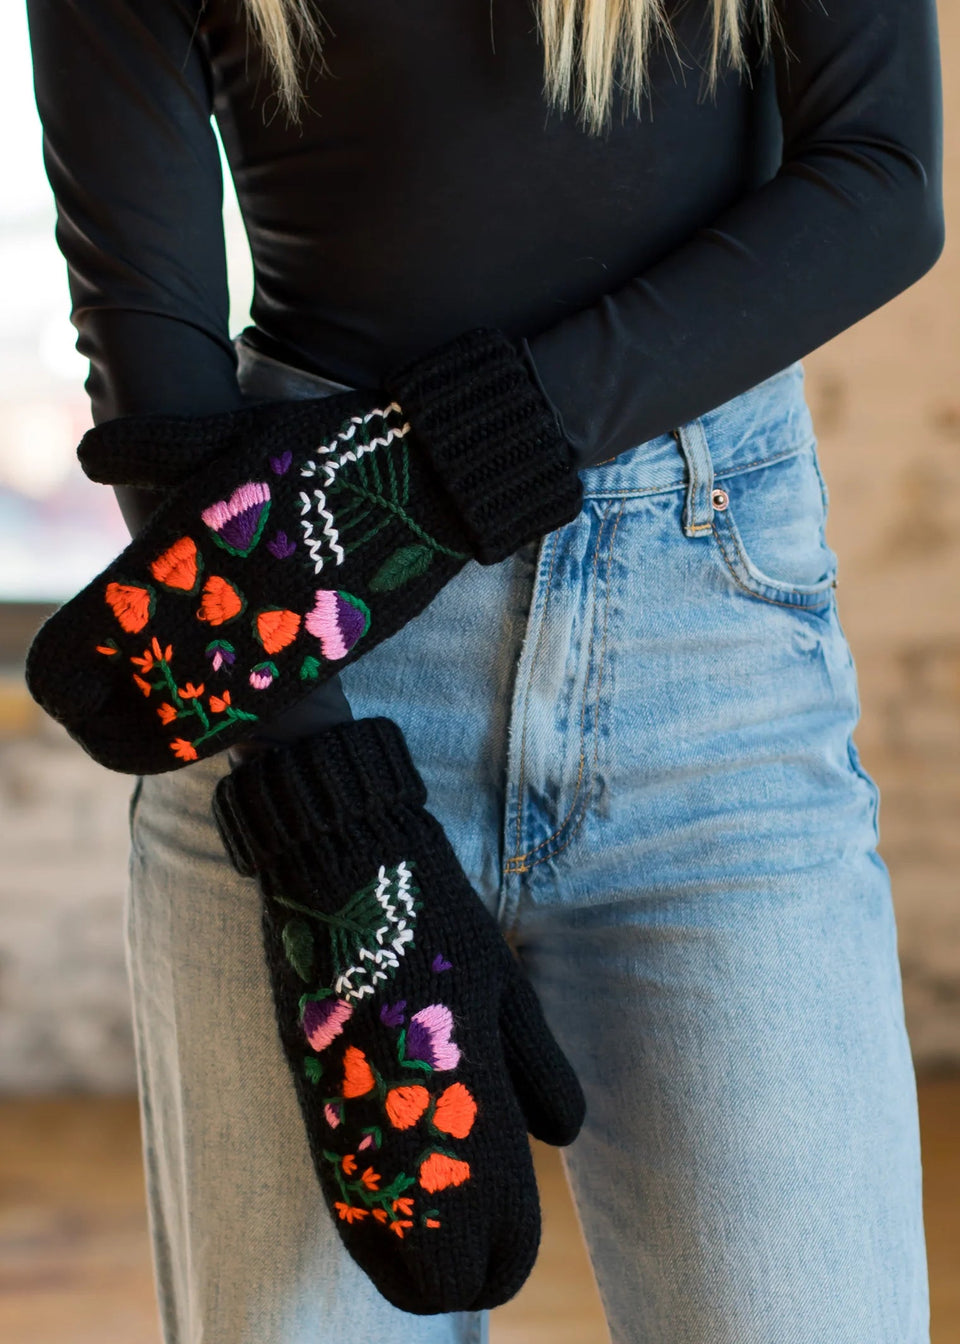 Dahlia Luxe Black Embroidered Mittens | petite shops